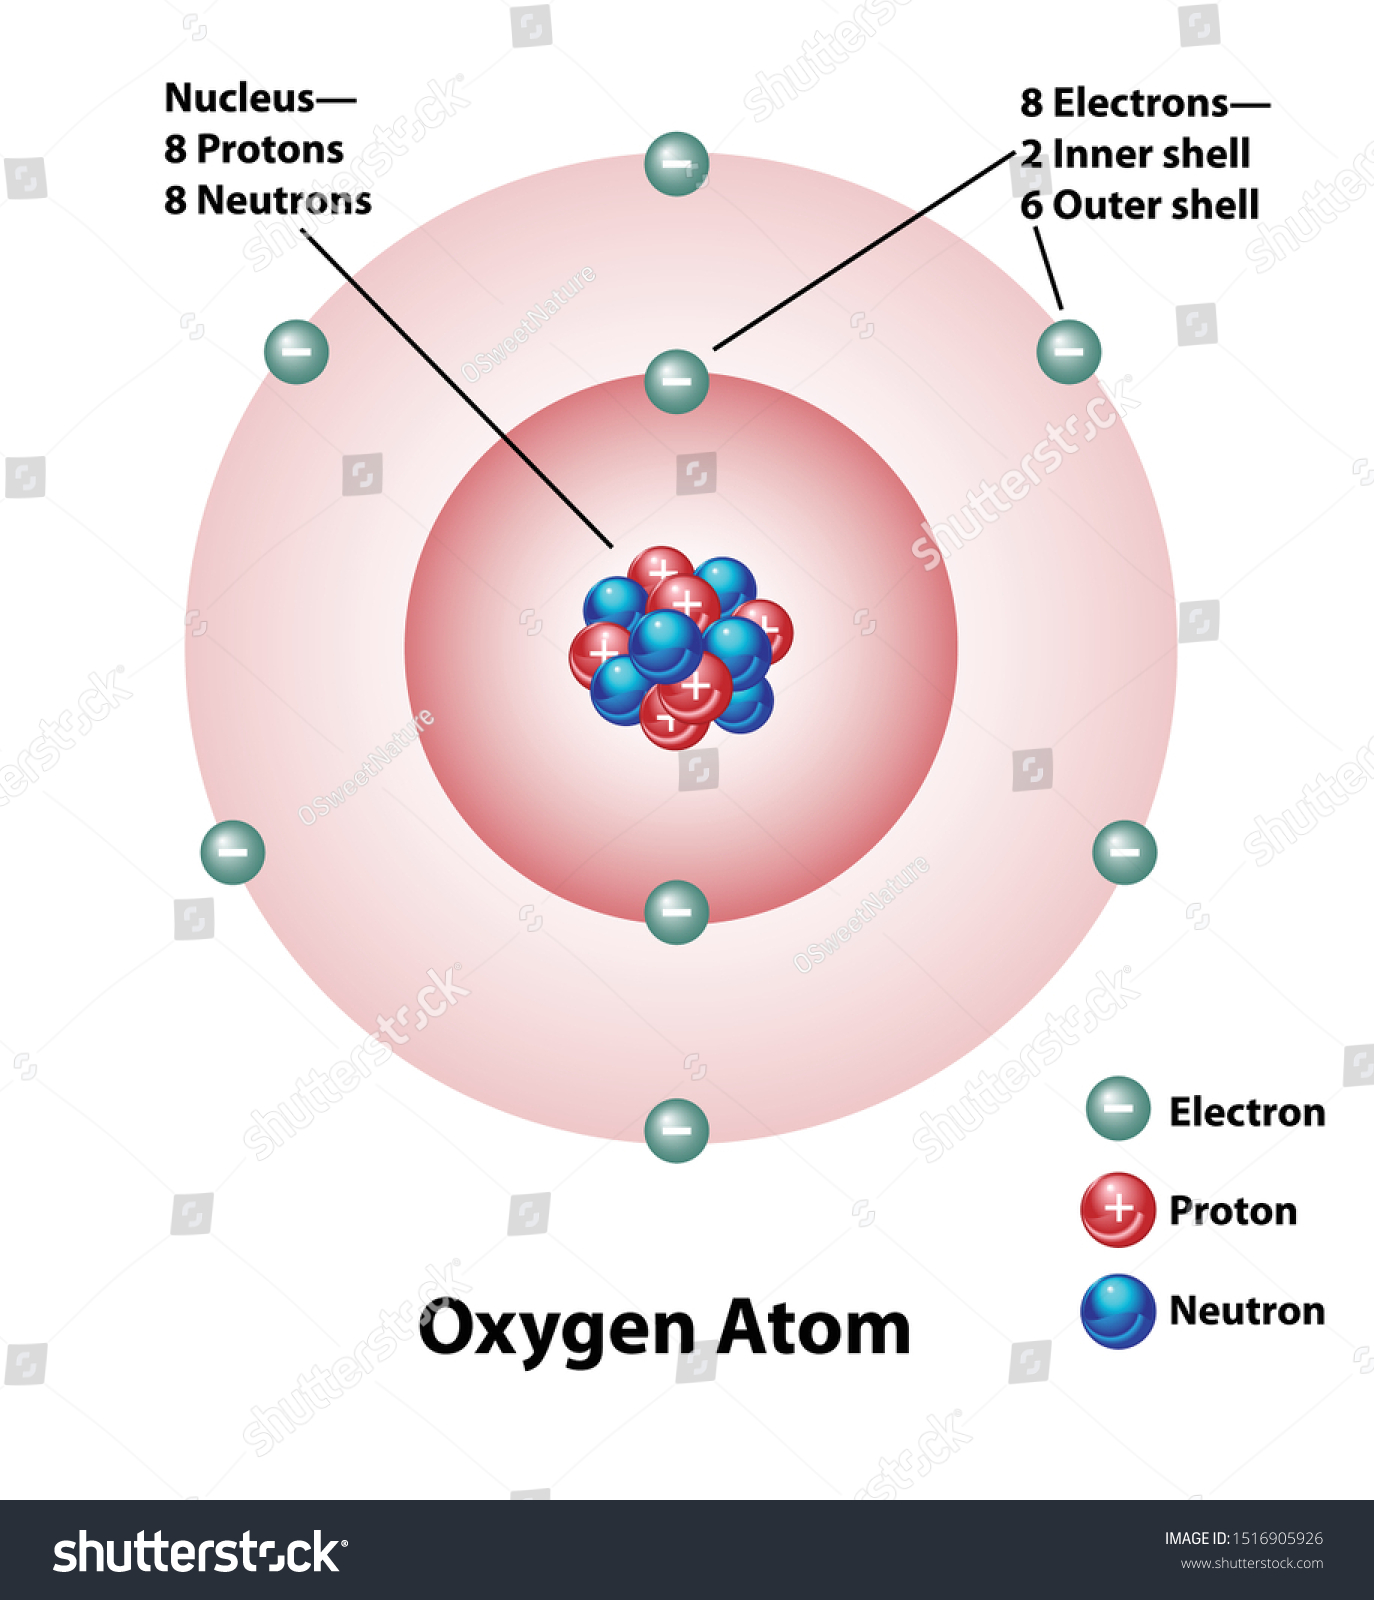 Diagram Oxygen Atom Nucleus Inner Outer Stock Vector (Royalty Free